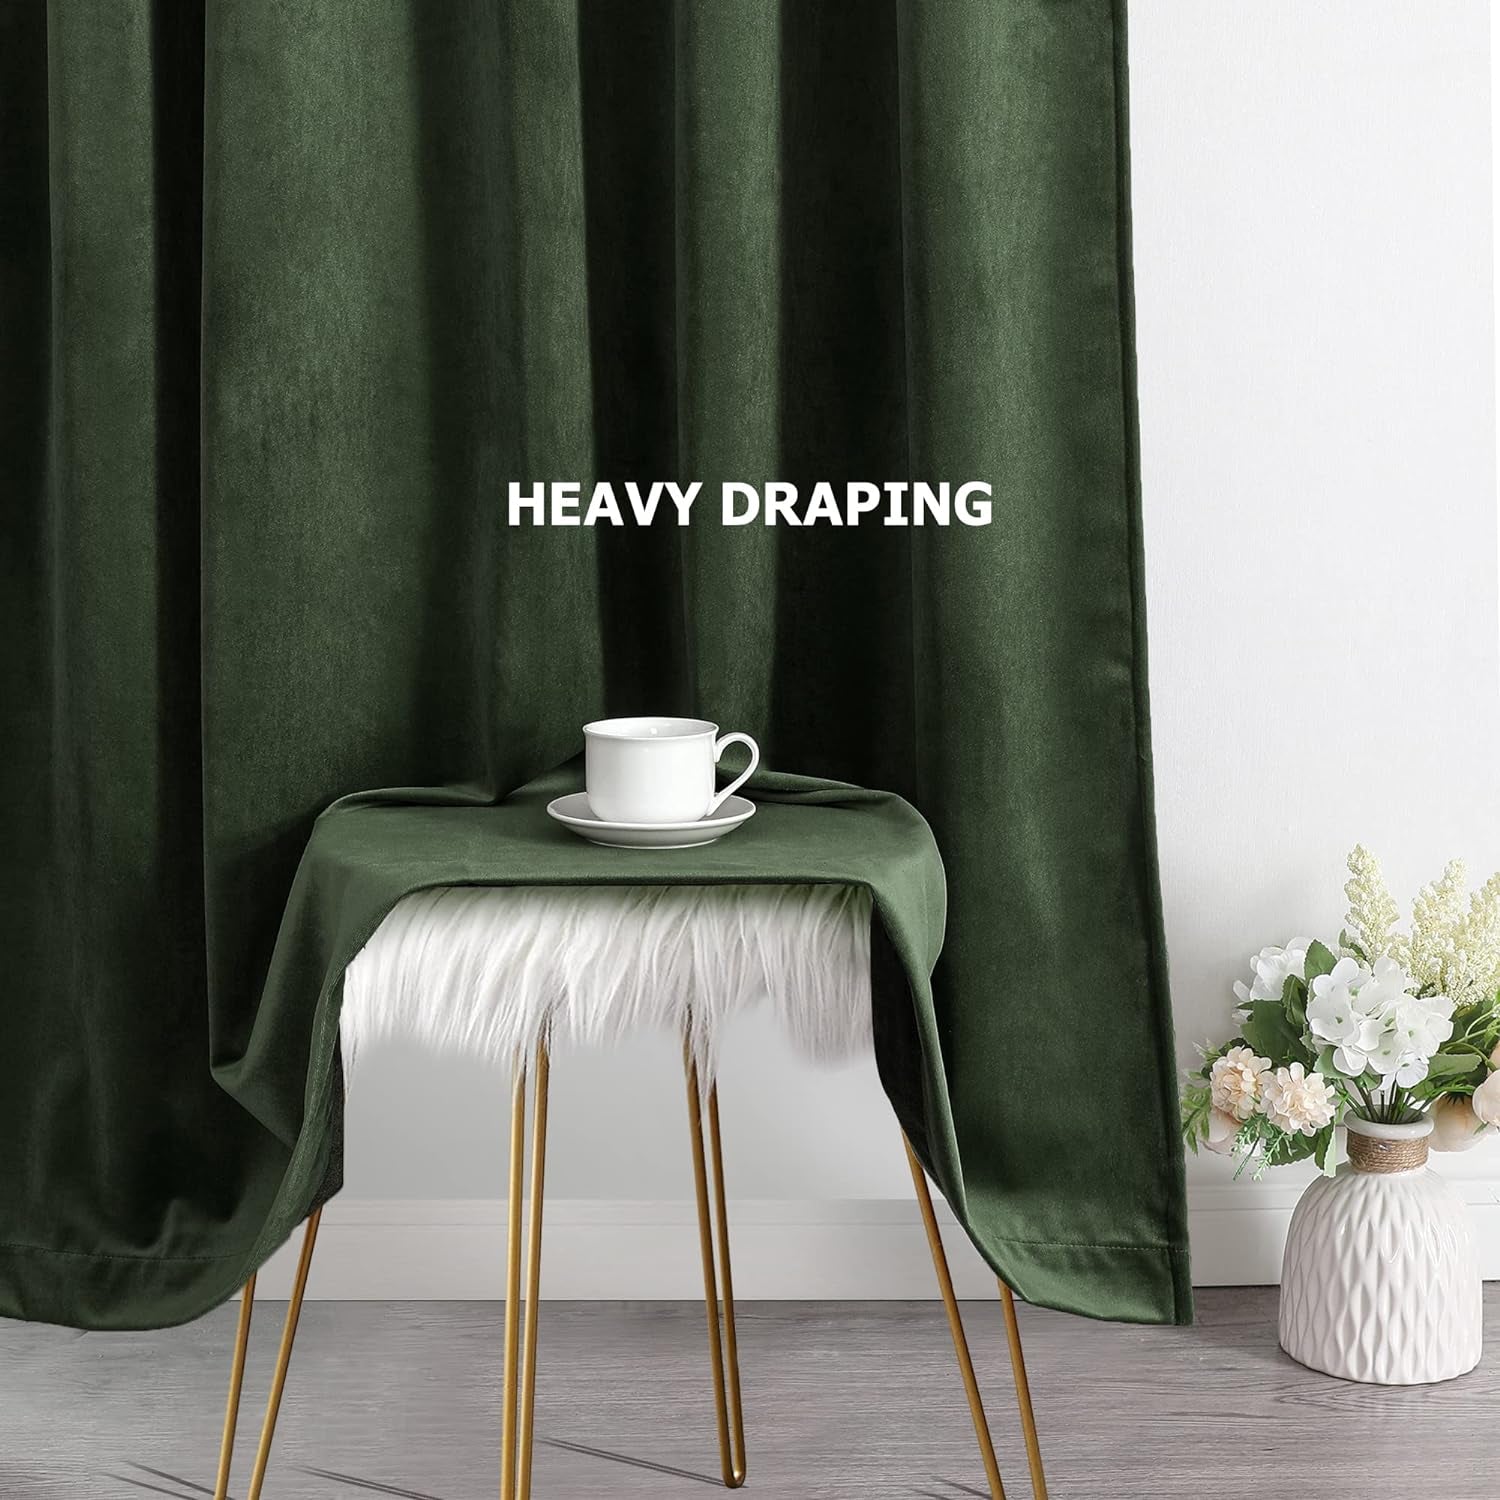 Benedeco Green Velvet Curtains for Bedroom Window, Super Soft Luxury Drapes, Room Darkening Thermal Insulated Rod Pocket Curtain for Living Room, W52 by L84 Inches, 2 Panels  Benedeco   